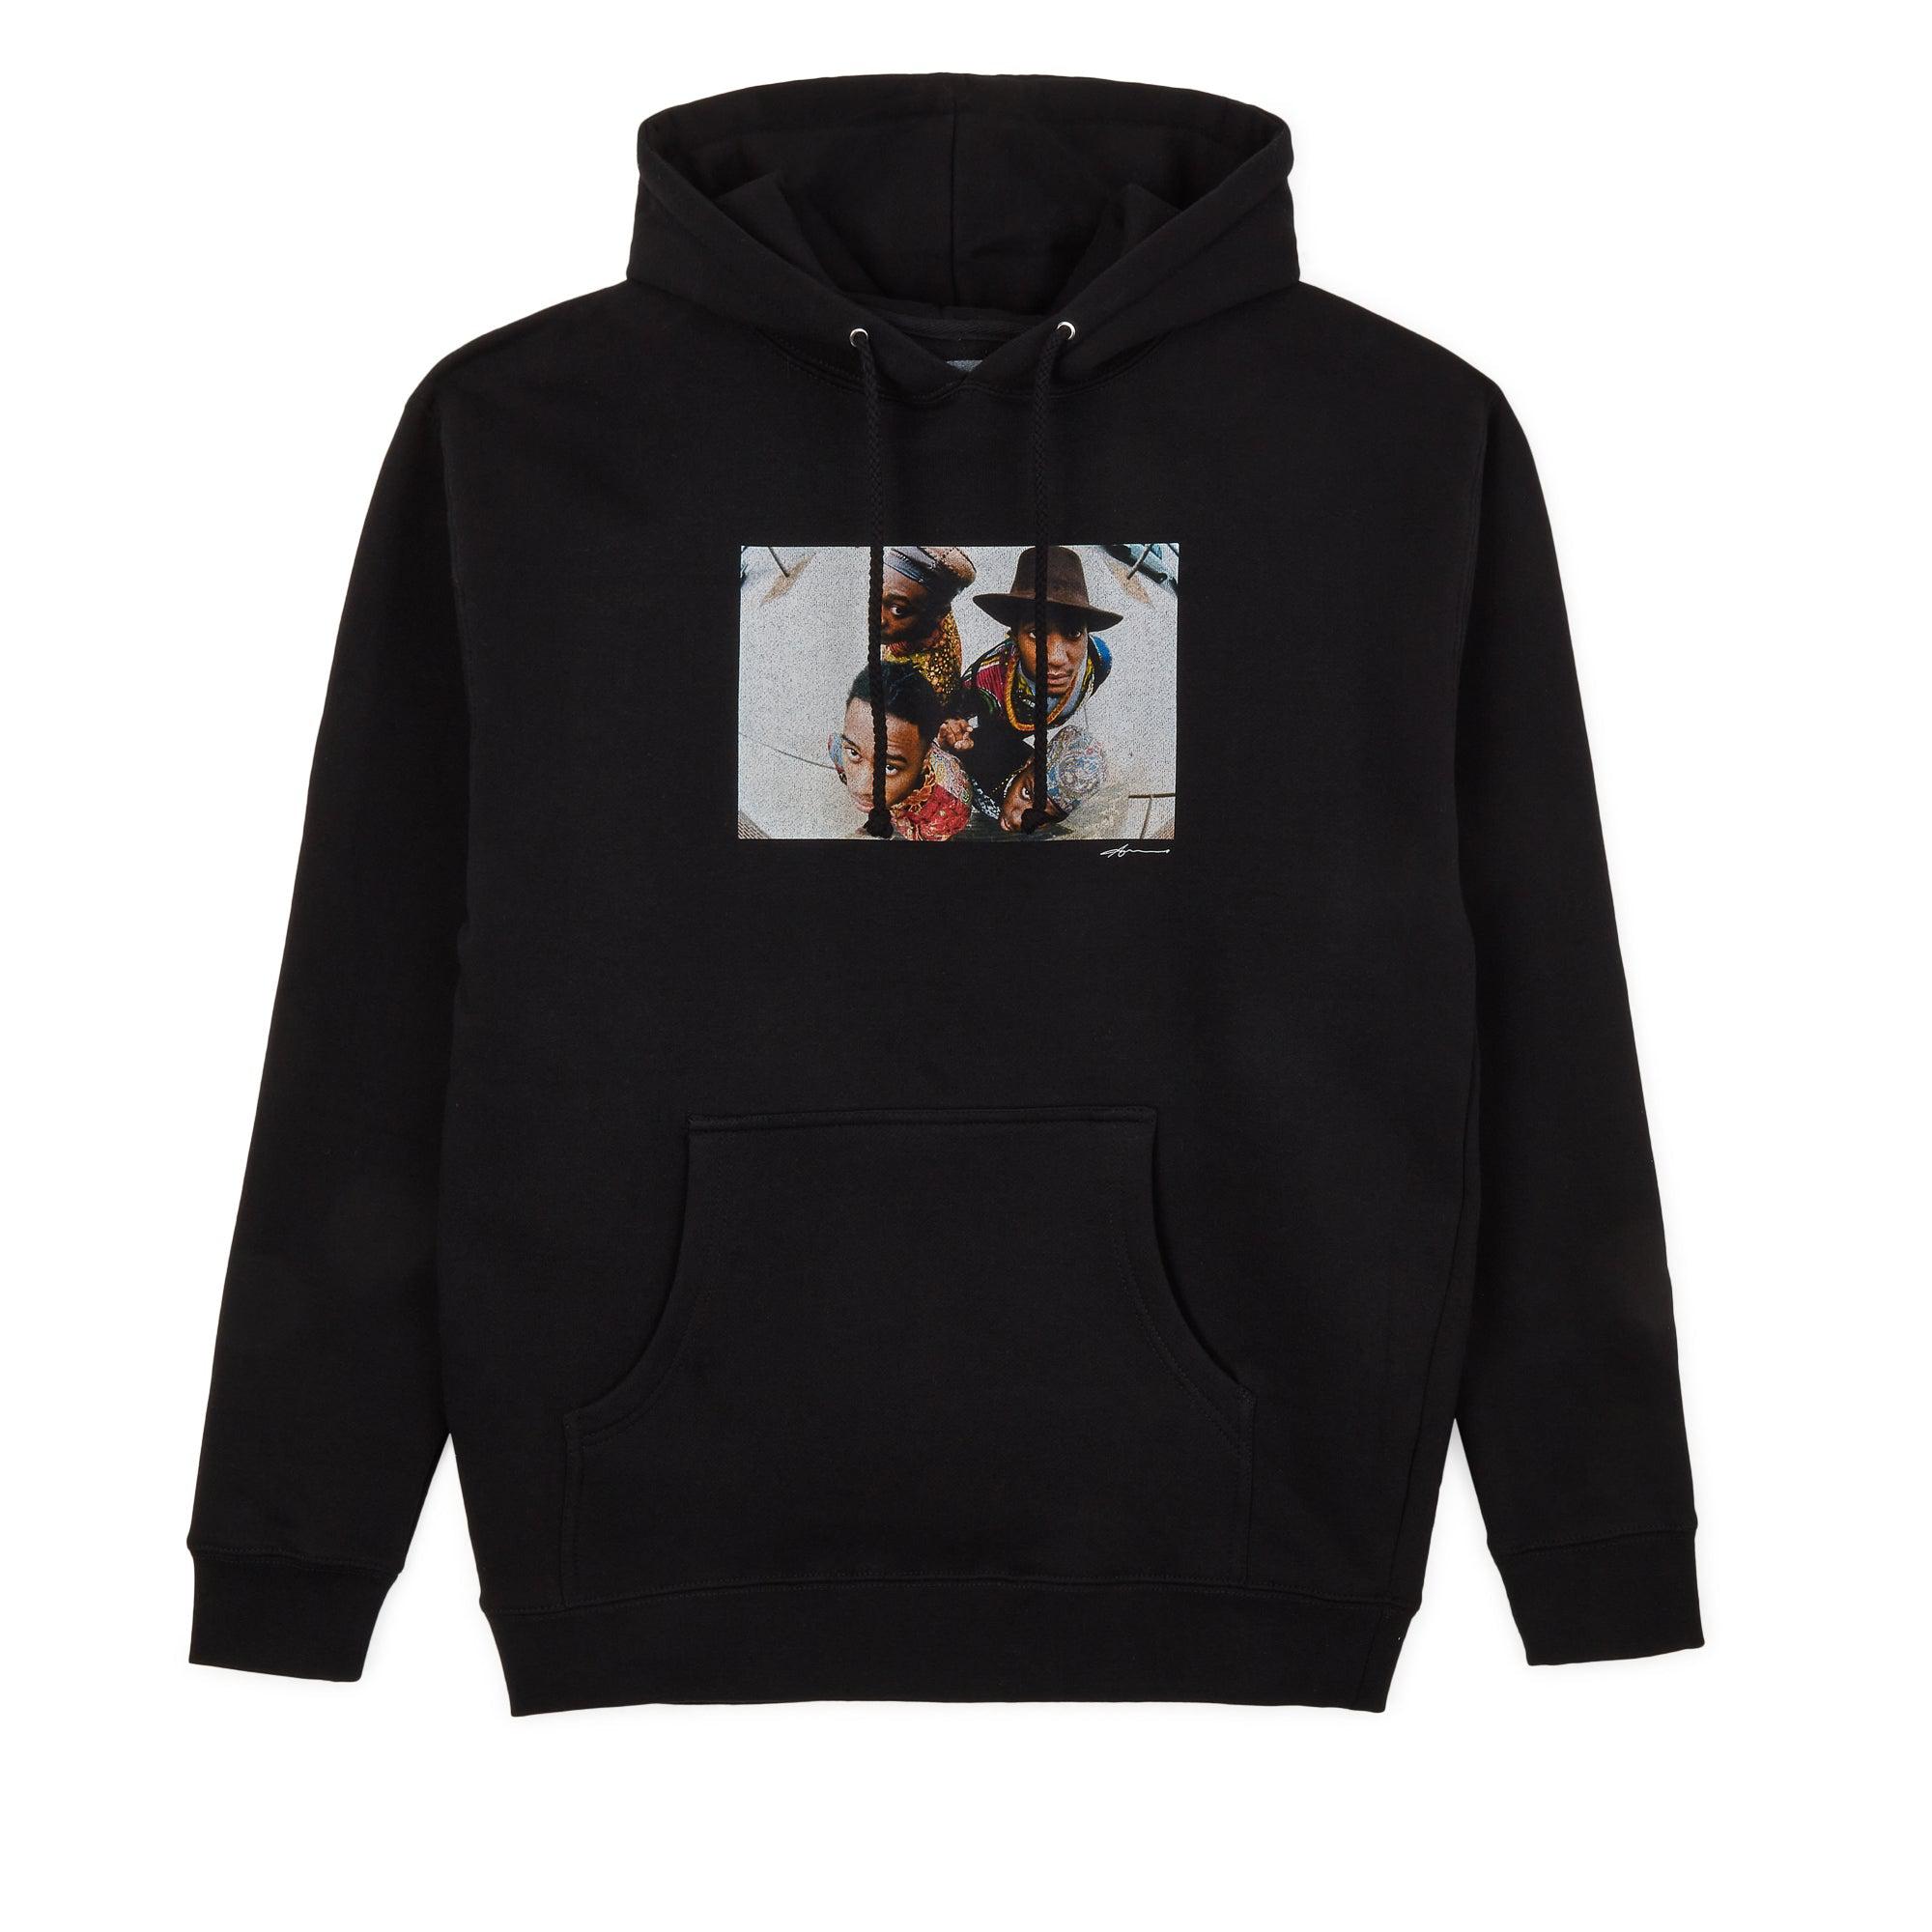 Ari Marcopoulos A Tribe Called Quest New York Hoodie (Black) by ARI MARCOPOULOS